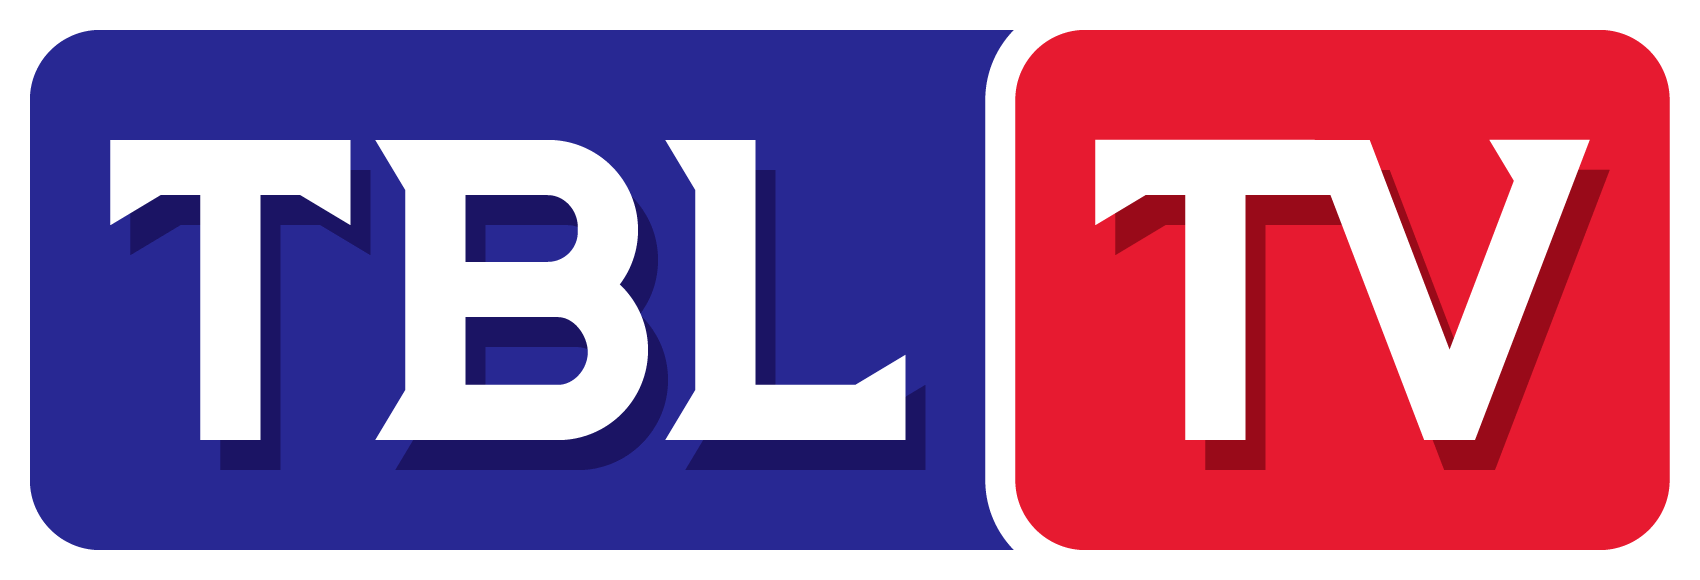 TBL? BSL? ABA? New season means new league and new letters for the  Newfoundland Rogues